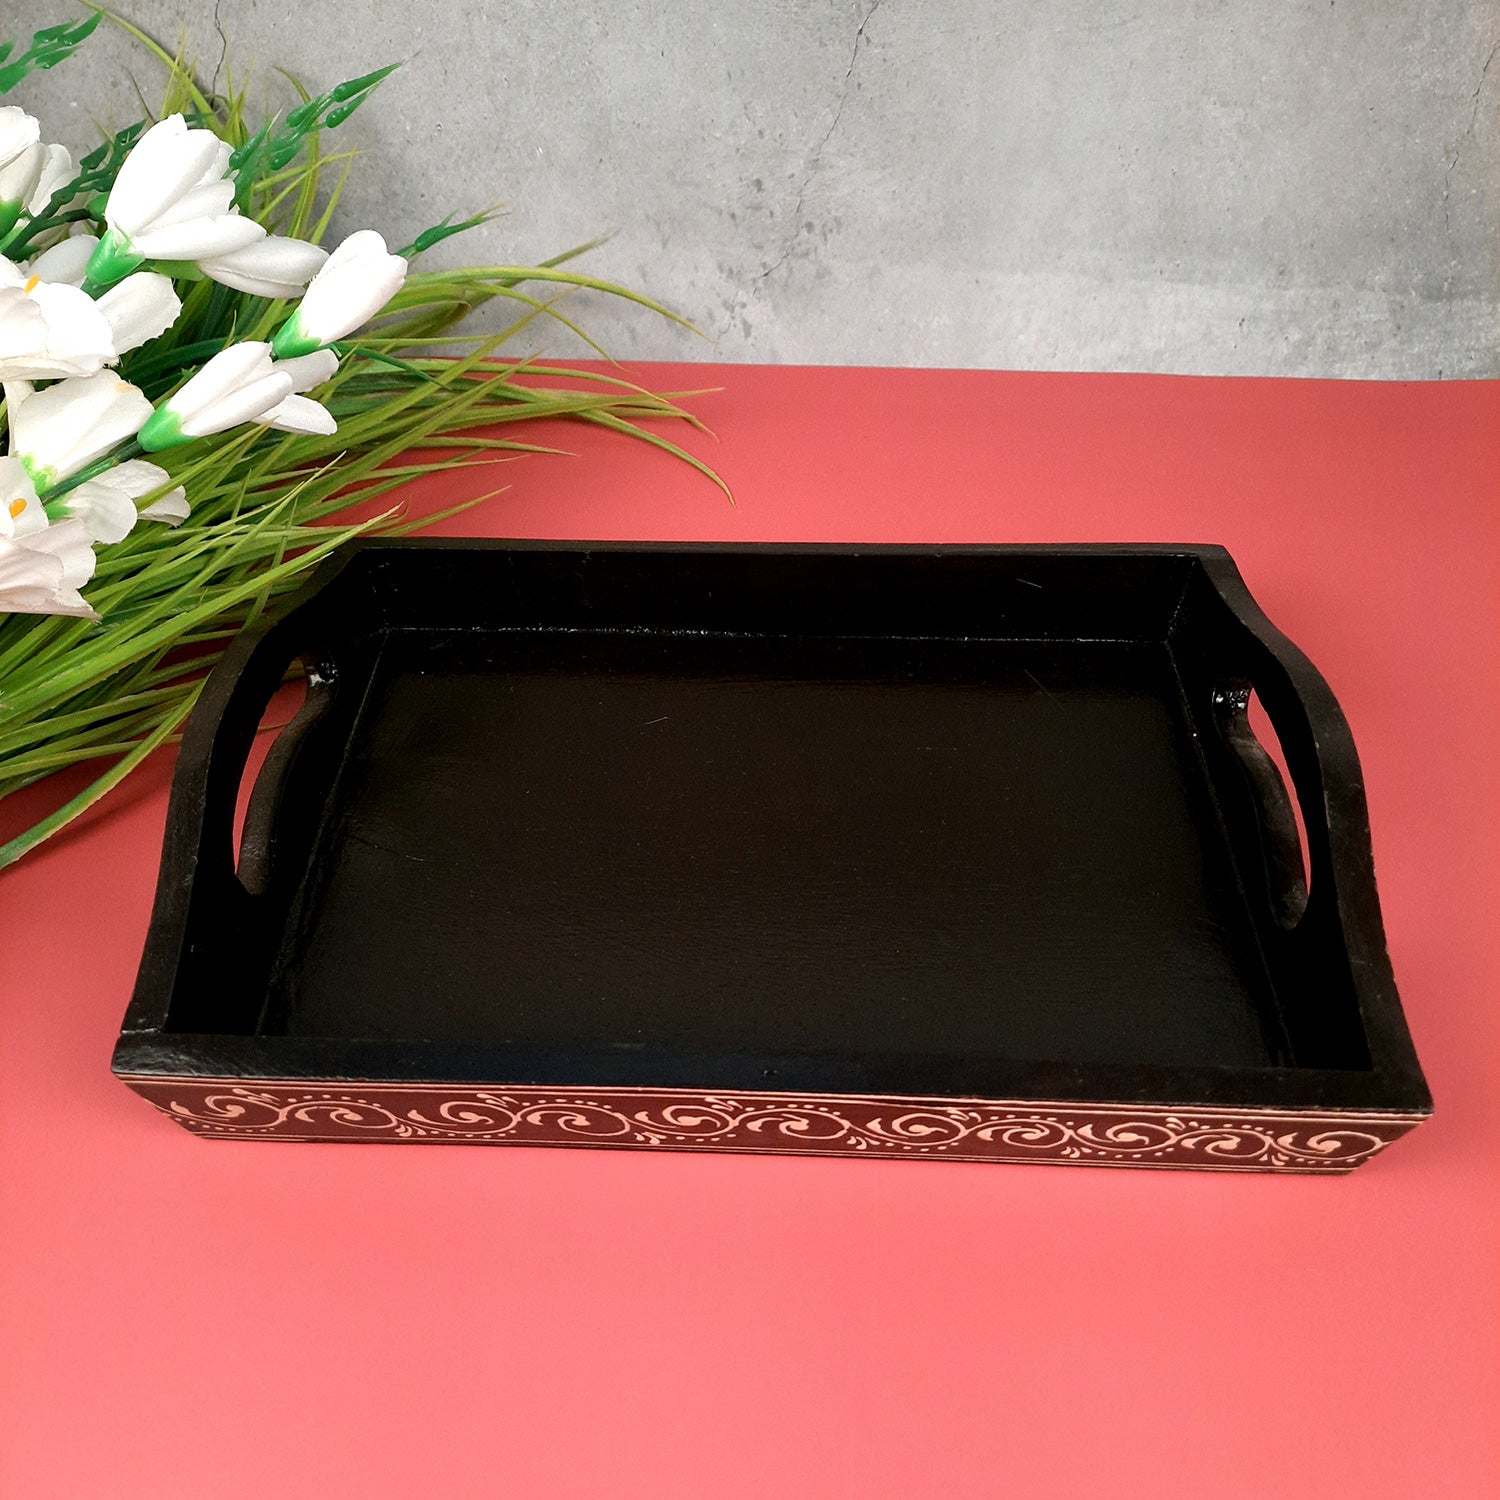 Serving Tray Wooden | Tea & Snacks Serving Platter | Hand Painted Tray - for Home, Dining Table, Kitchen Decor, Restaurants, Office, Cafe & Gifts - 12 Inch - Apkamart